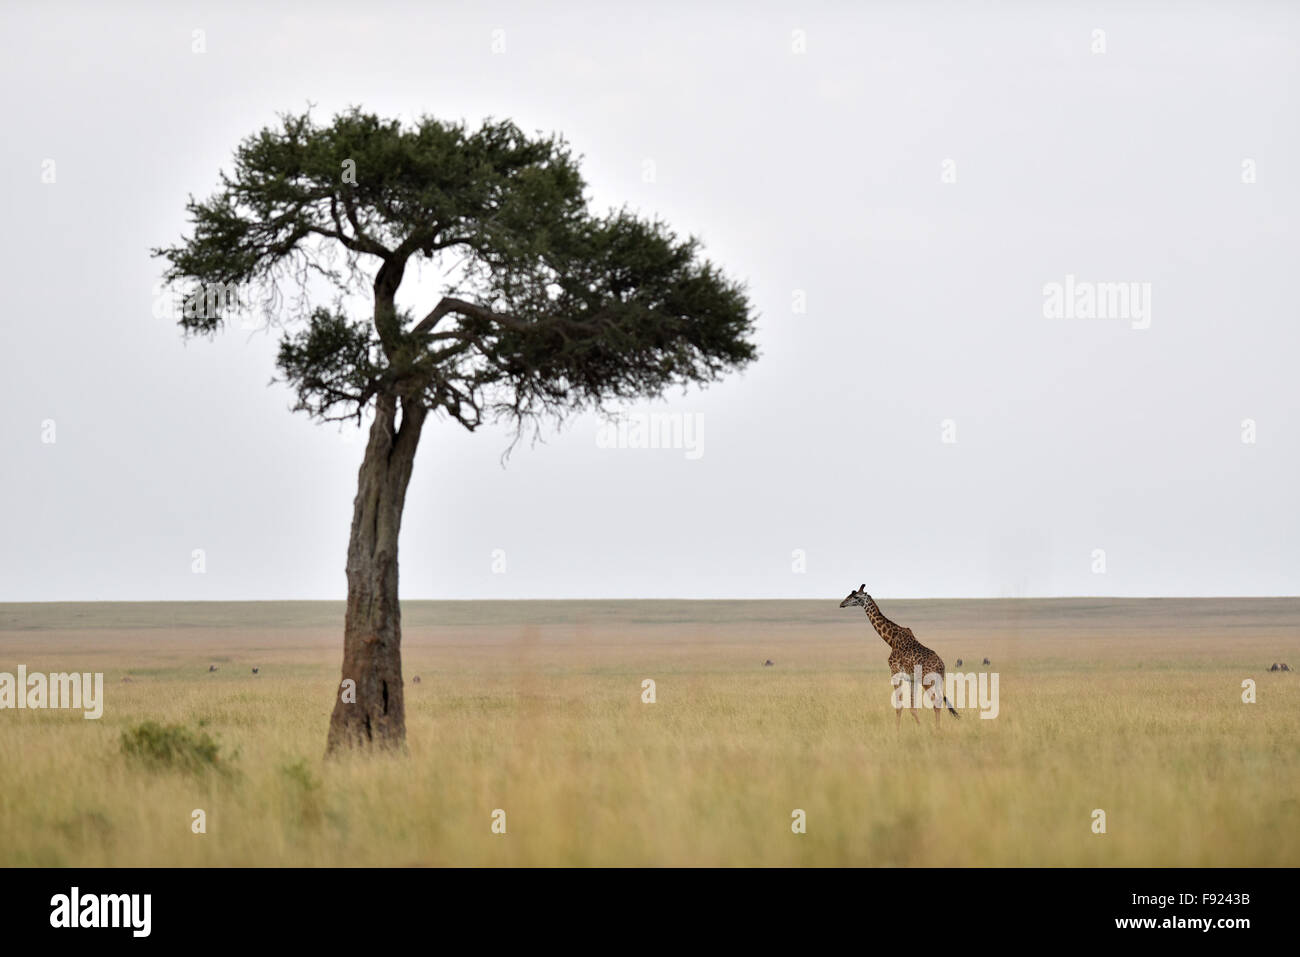 (151213) -- MASAI MARA, Dec. 13, 2015 (Xinhua) -- A giraffe walks on the savanna in Kenya's Masai Mara National Reserve, on Aug. 14, 2015. As a country Kenya has considerable land area devoted to wildlife habitats. The tropical wet and dry climate created a vast tropical savanna for Kenya and for the wildlife to thrill. In return, the great savanna and the diverse wildlife brought the country a worldwide reputation. Alone in Masai Mara National Reserve, there are approximately 95 mammal species and 450 bird species. All five of the 'Big Five' game animals of Africa, that is the lion, leopard,  Stock Photo